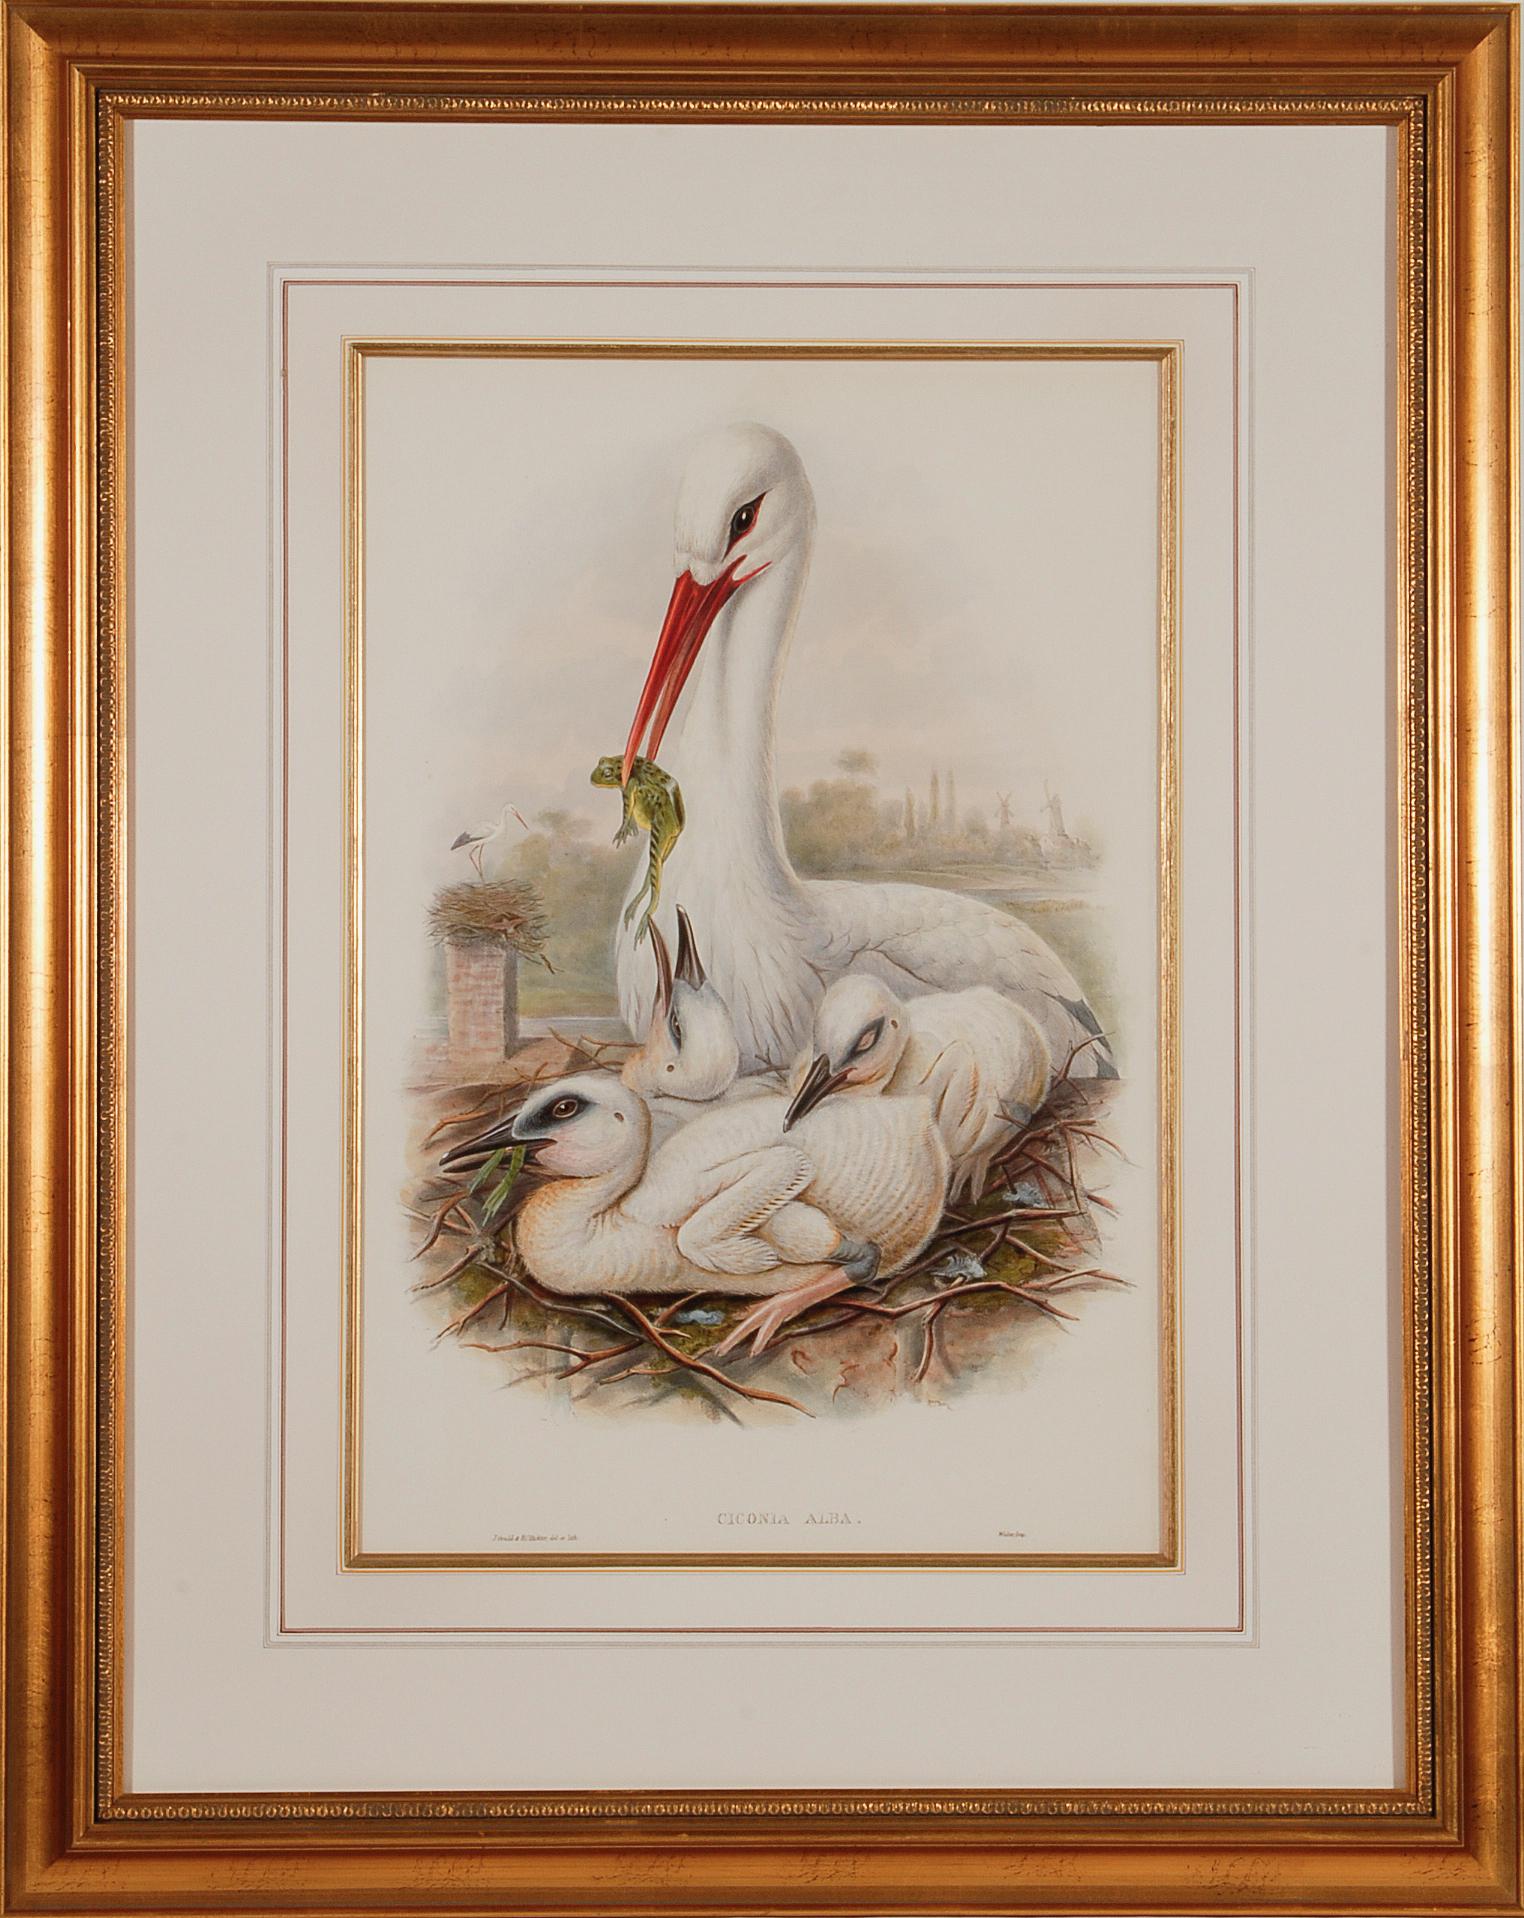 Stork Family: A Framed Original 19th C. Hand-colored Lithograph by Gould